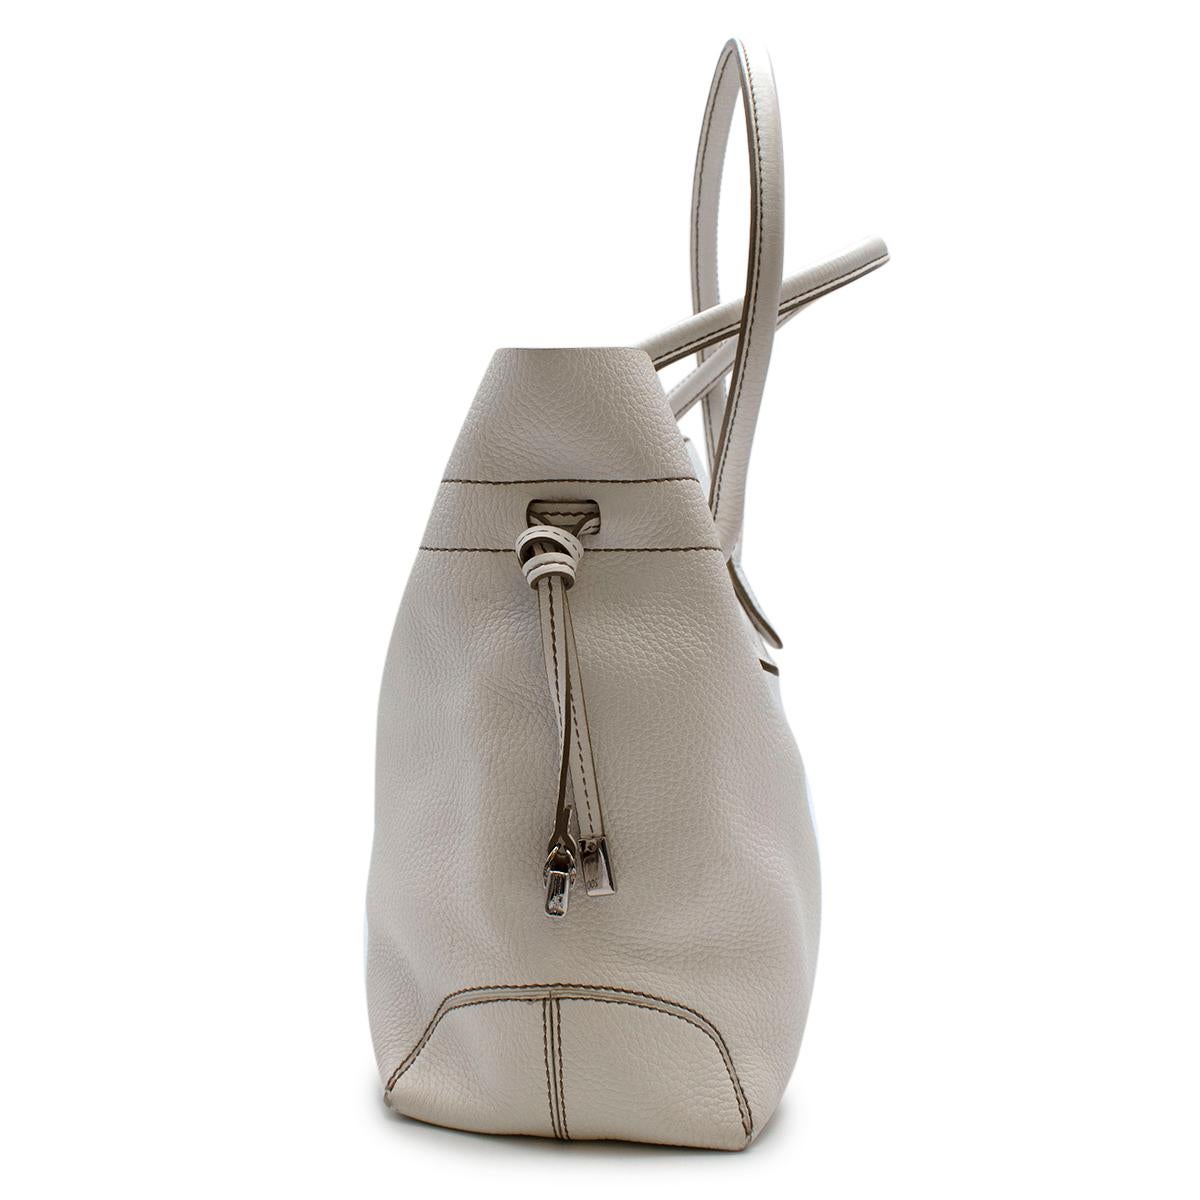 Tods White Leather D-bag Tote Bag

- Made of soft grained leather 
- Classic style 
- Fastenings to the sides 
- Top handles 
- Branded to the front 
- 2 inner pockets, one zipped 
- Neutral white hue 
- Timeless versatile design